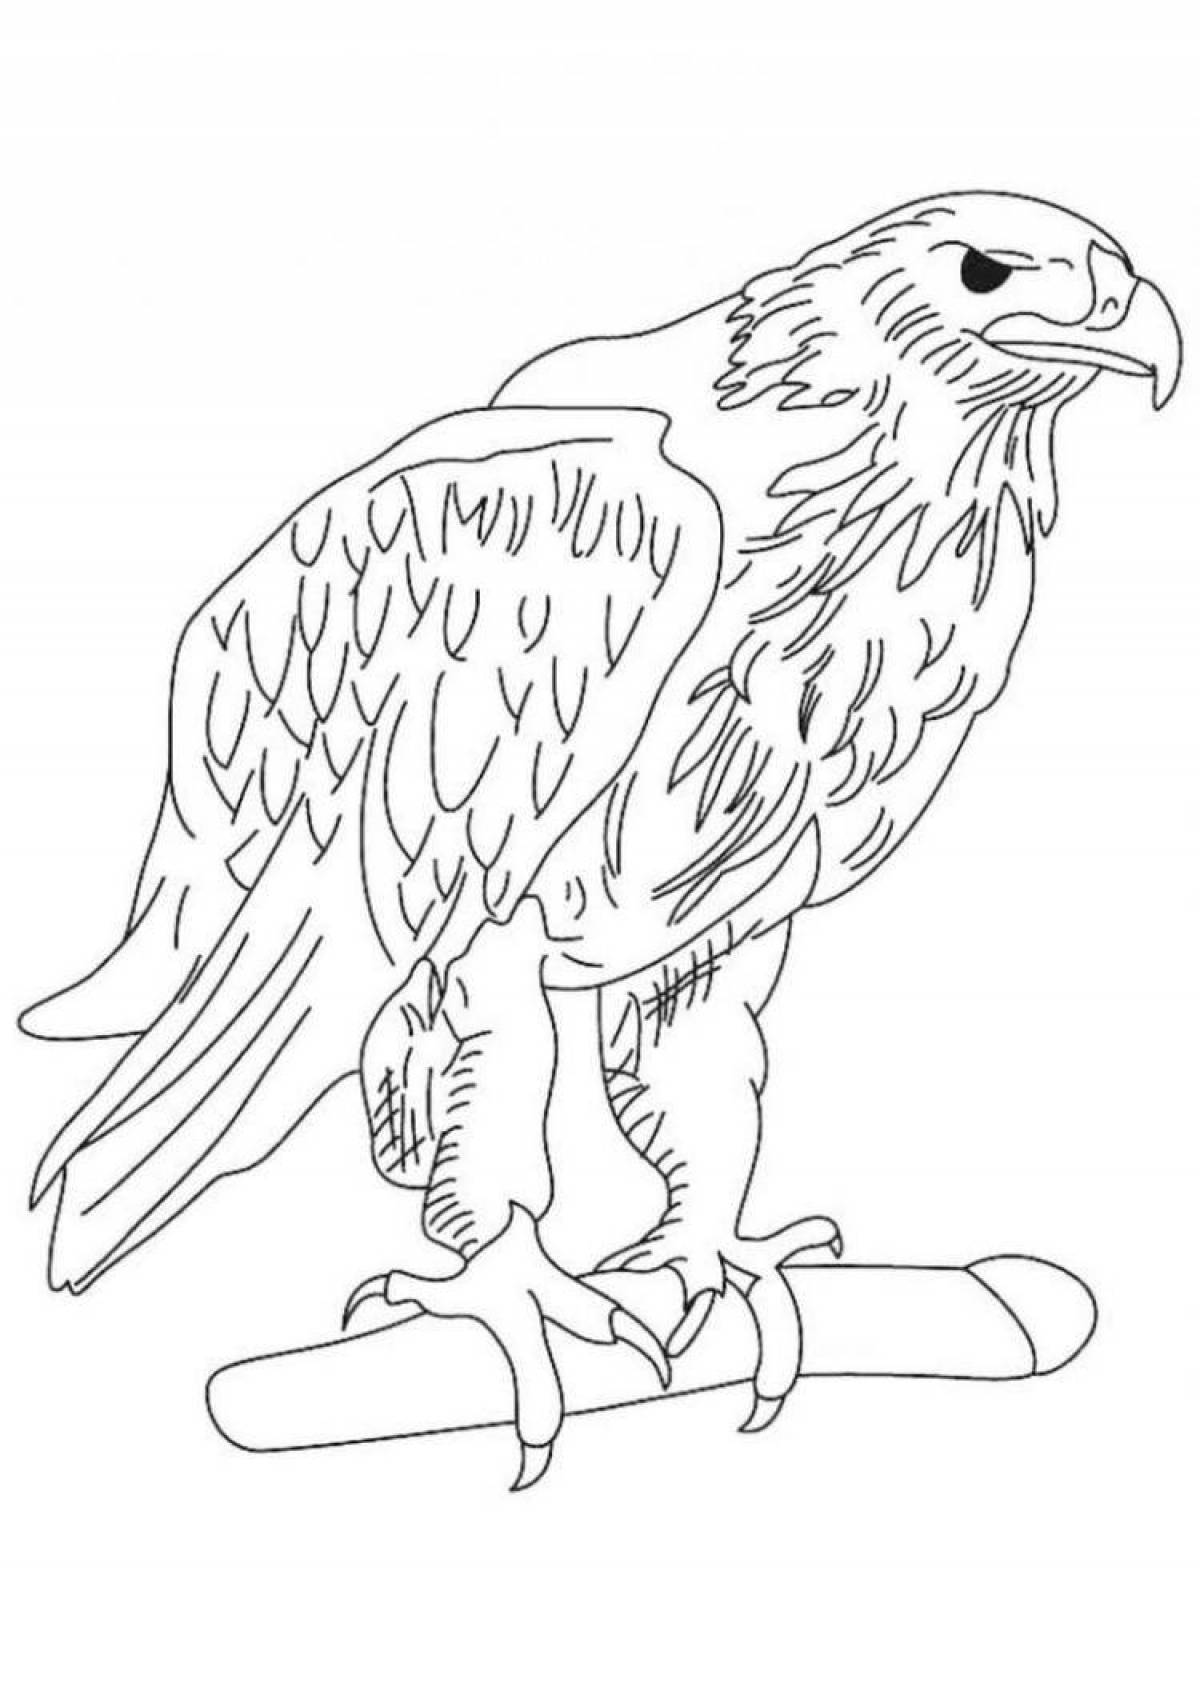 Glowing white-tailed eagle coloring page